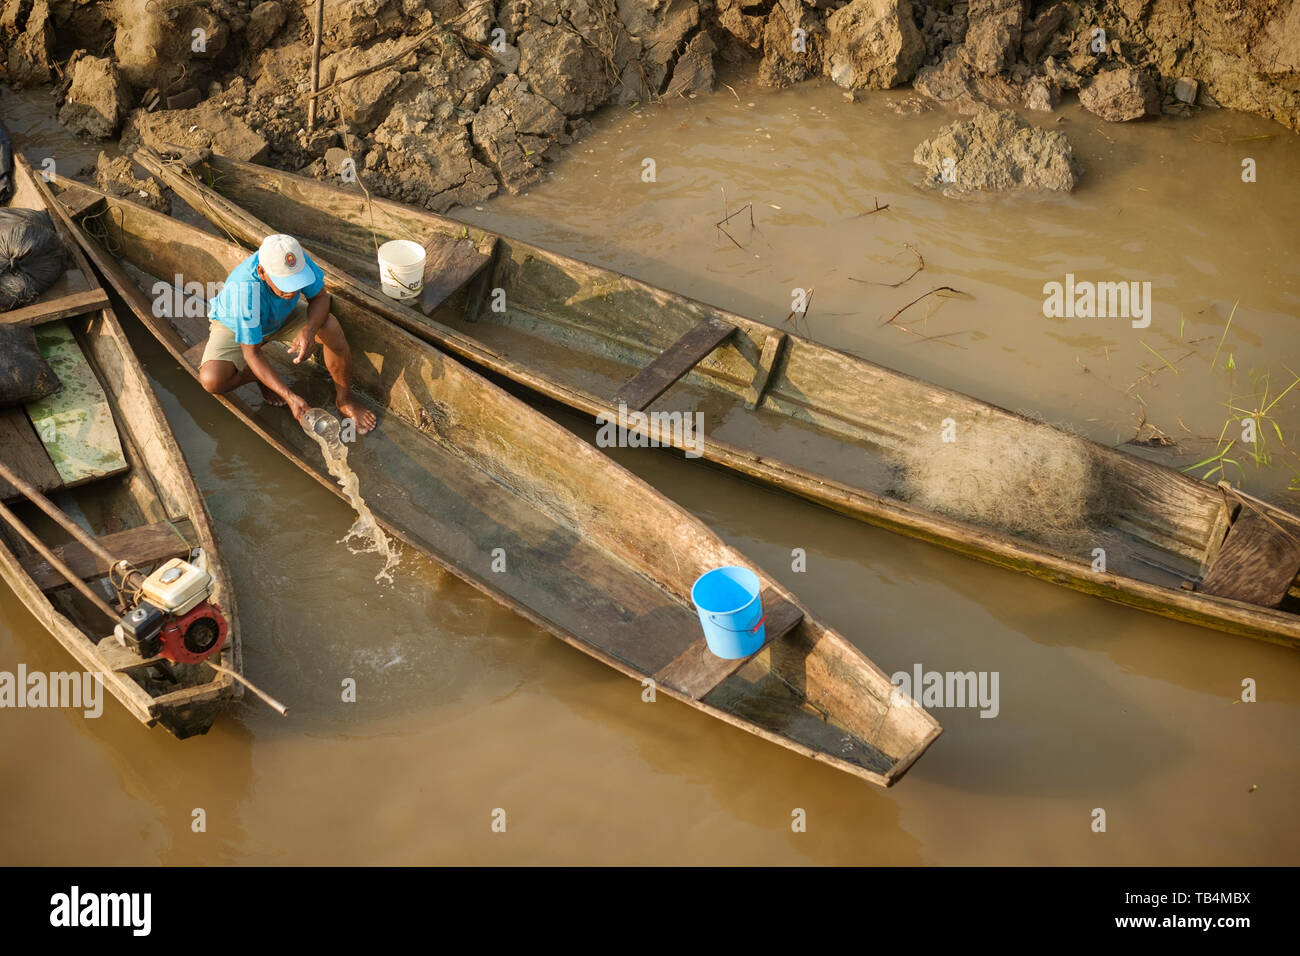 Man bailing water from his wooden boat docked on the riverbank of the Ucayali River, Peruvian Amazon Basin, Loreto Department, Peru Stock Photo